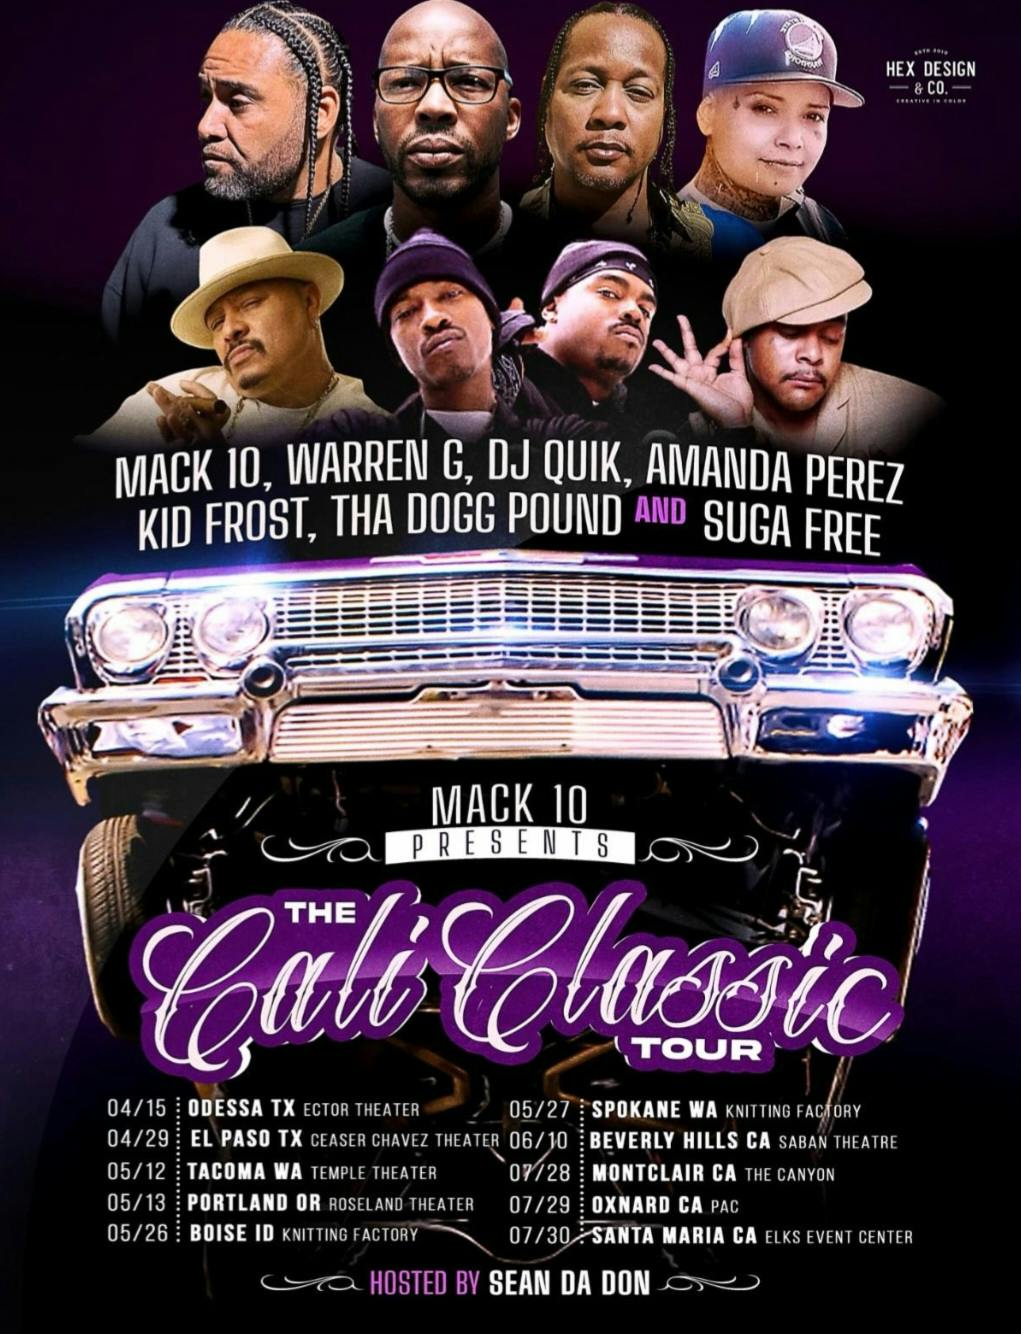 Musical guest Mack 10 of Westside Connection performs on